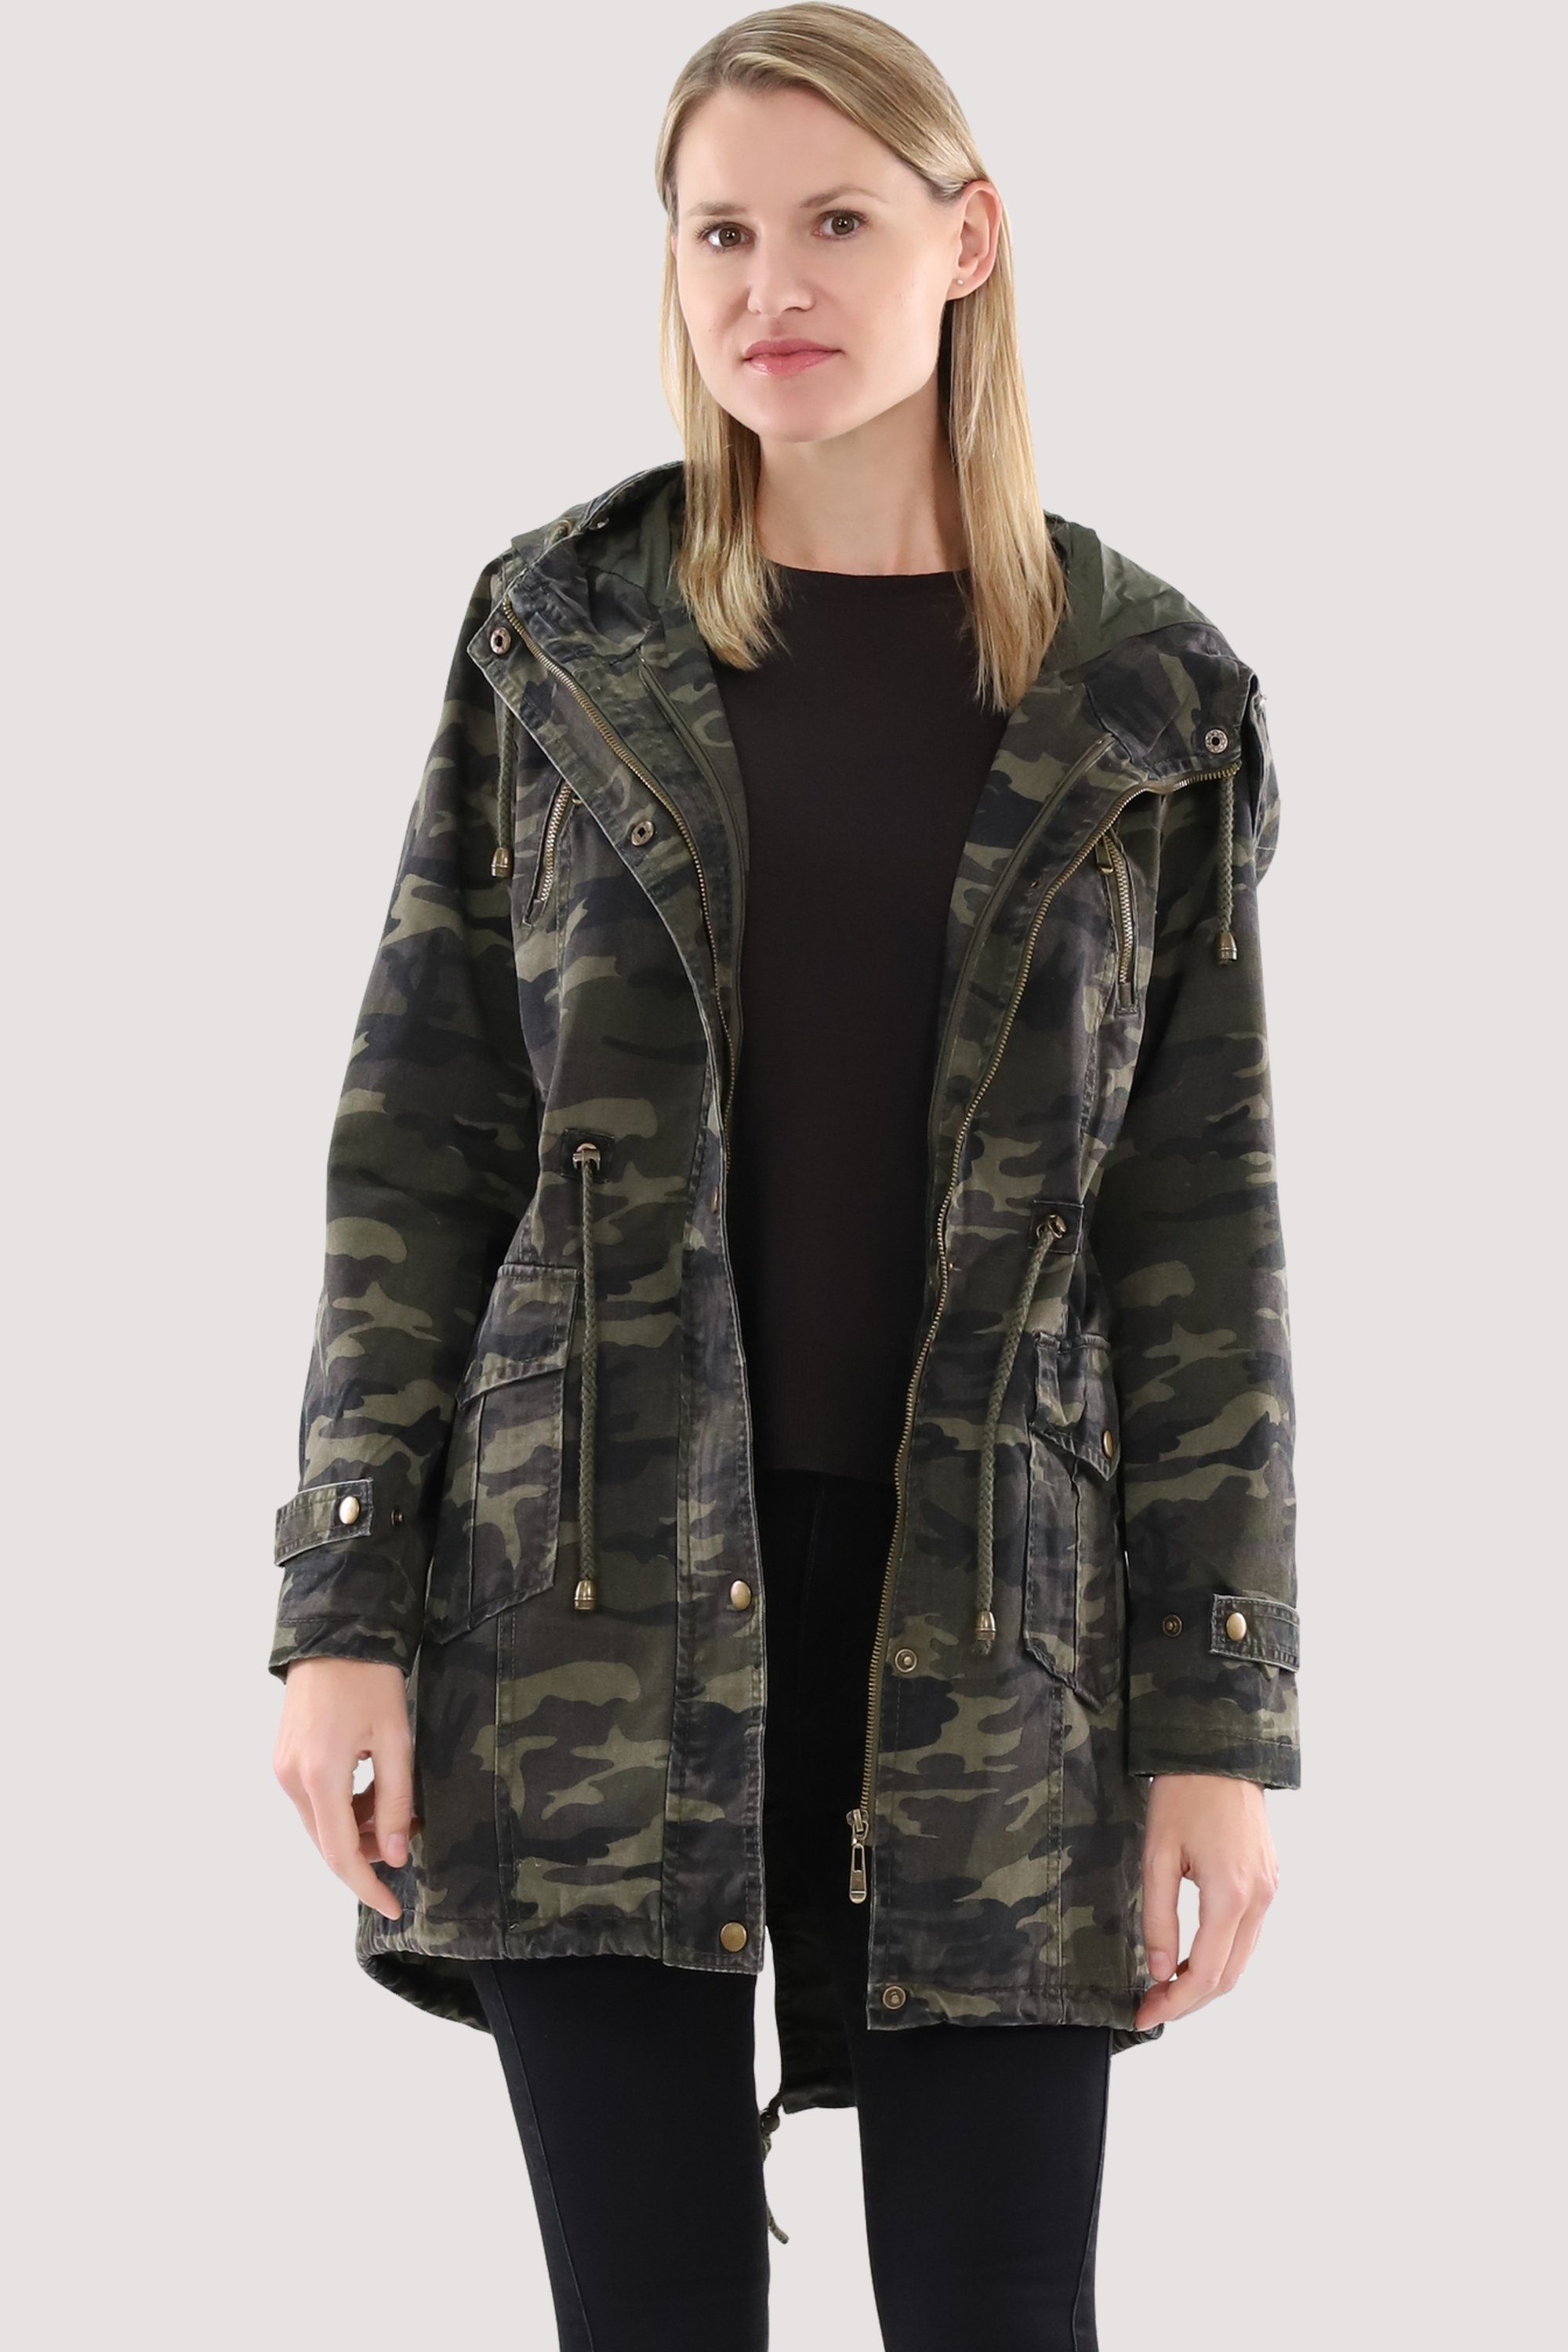 Camouflage Teddyfell mit more in Winterjacke 81109 military-81108 malito fashion Military-Look Parka than